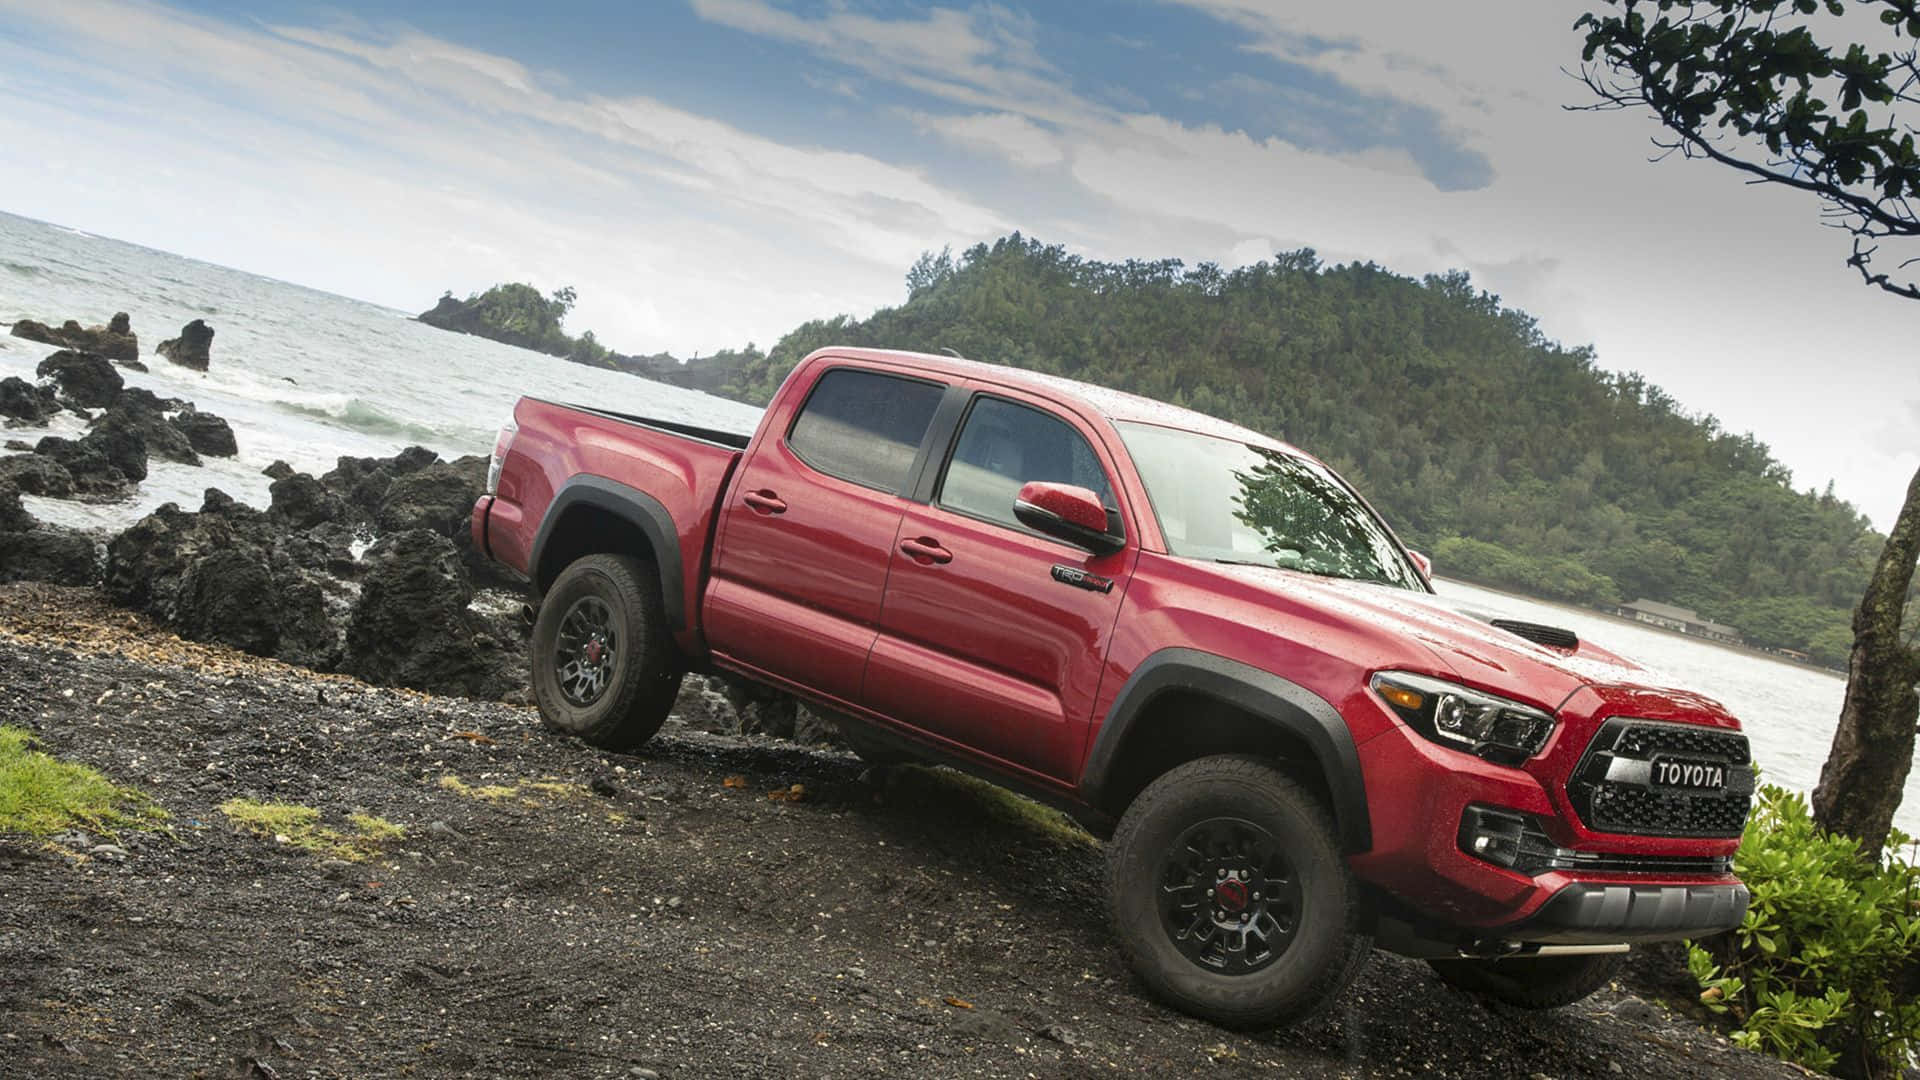 Stunning View Of A Toyota Tacoma Braving The Wilderness. Wallpaper